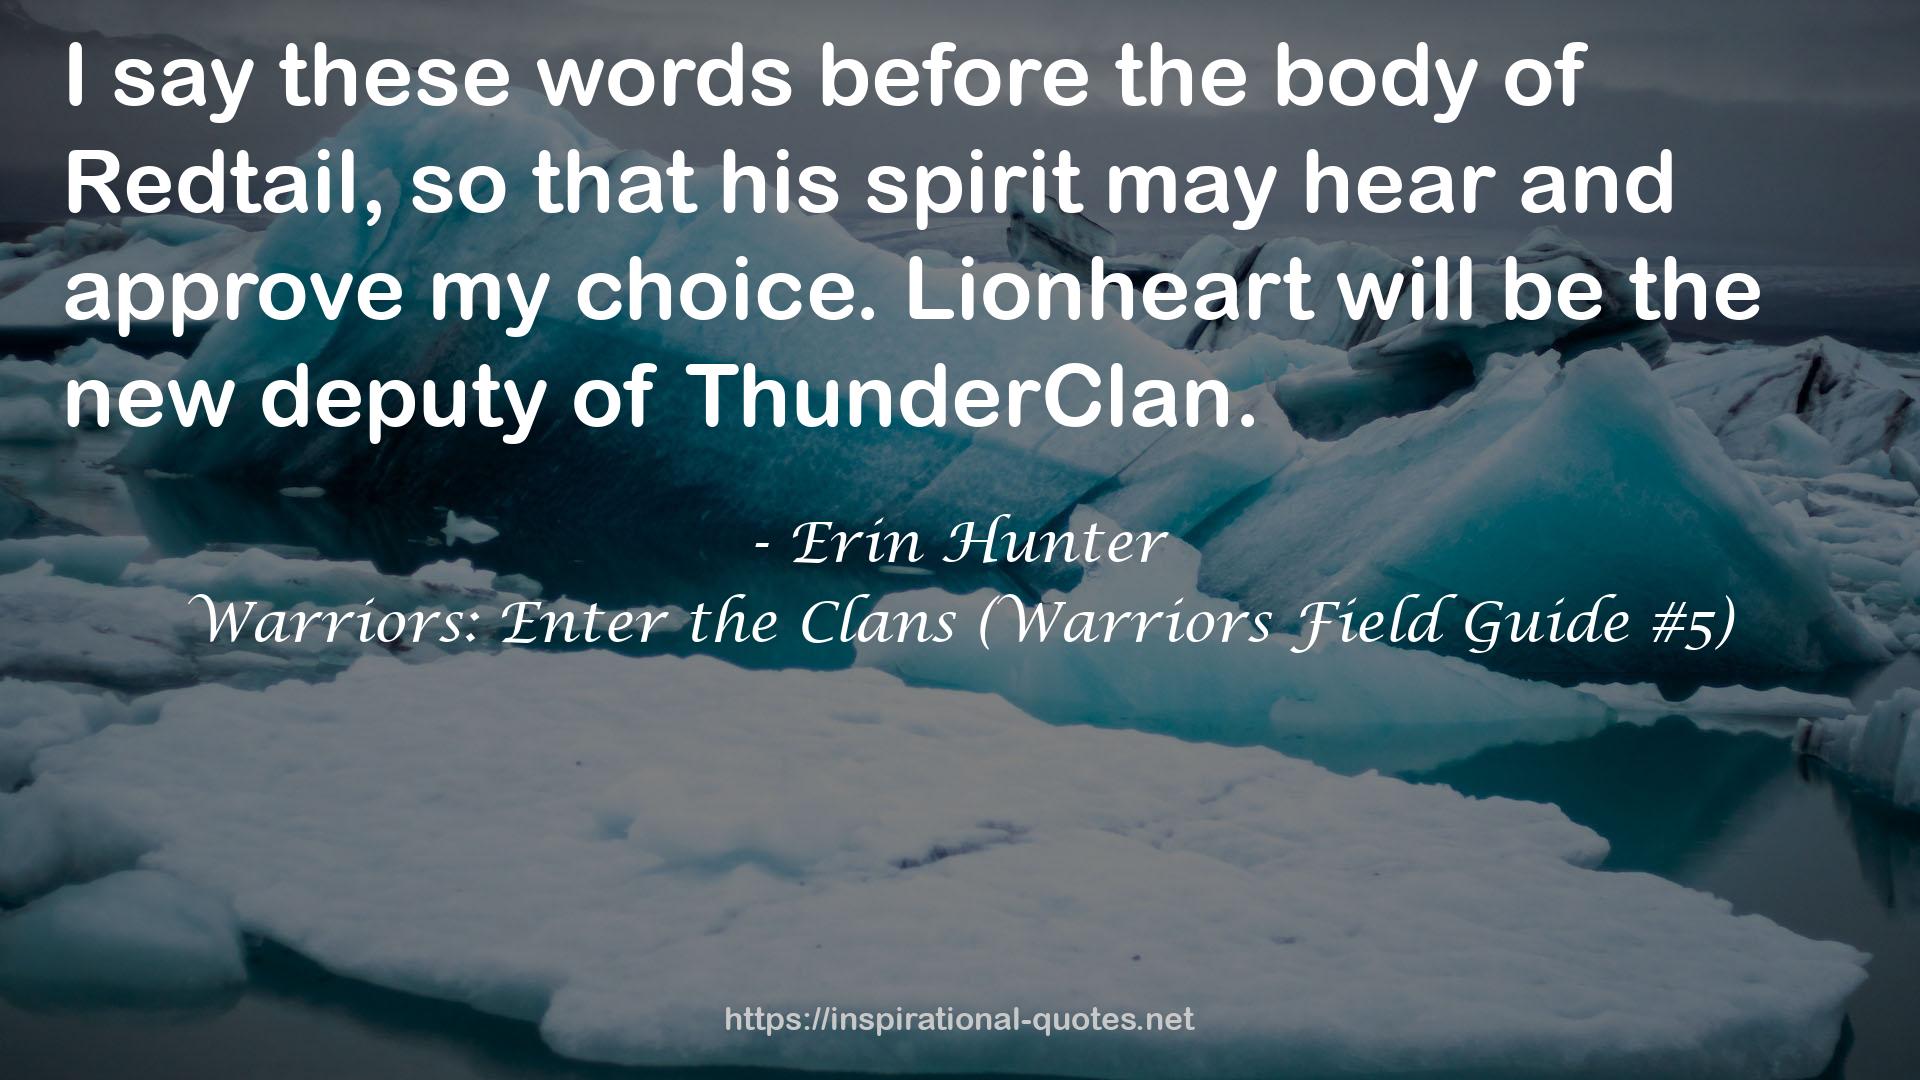 Warriors: Enter the Clans (Warriors Field Guide #5) QUOTES